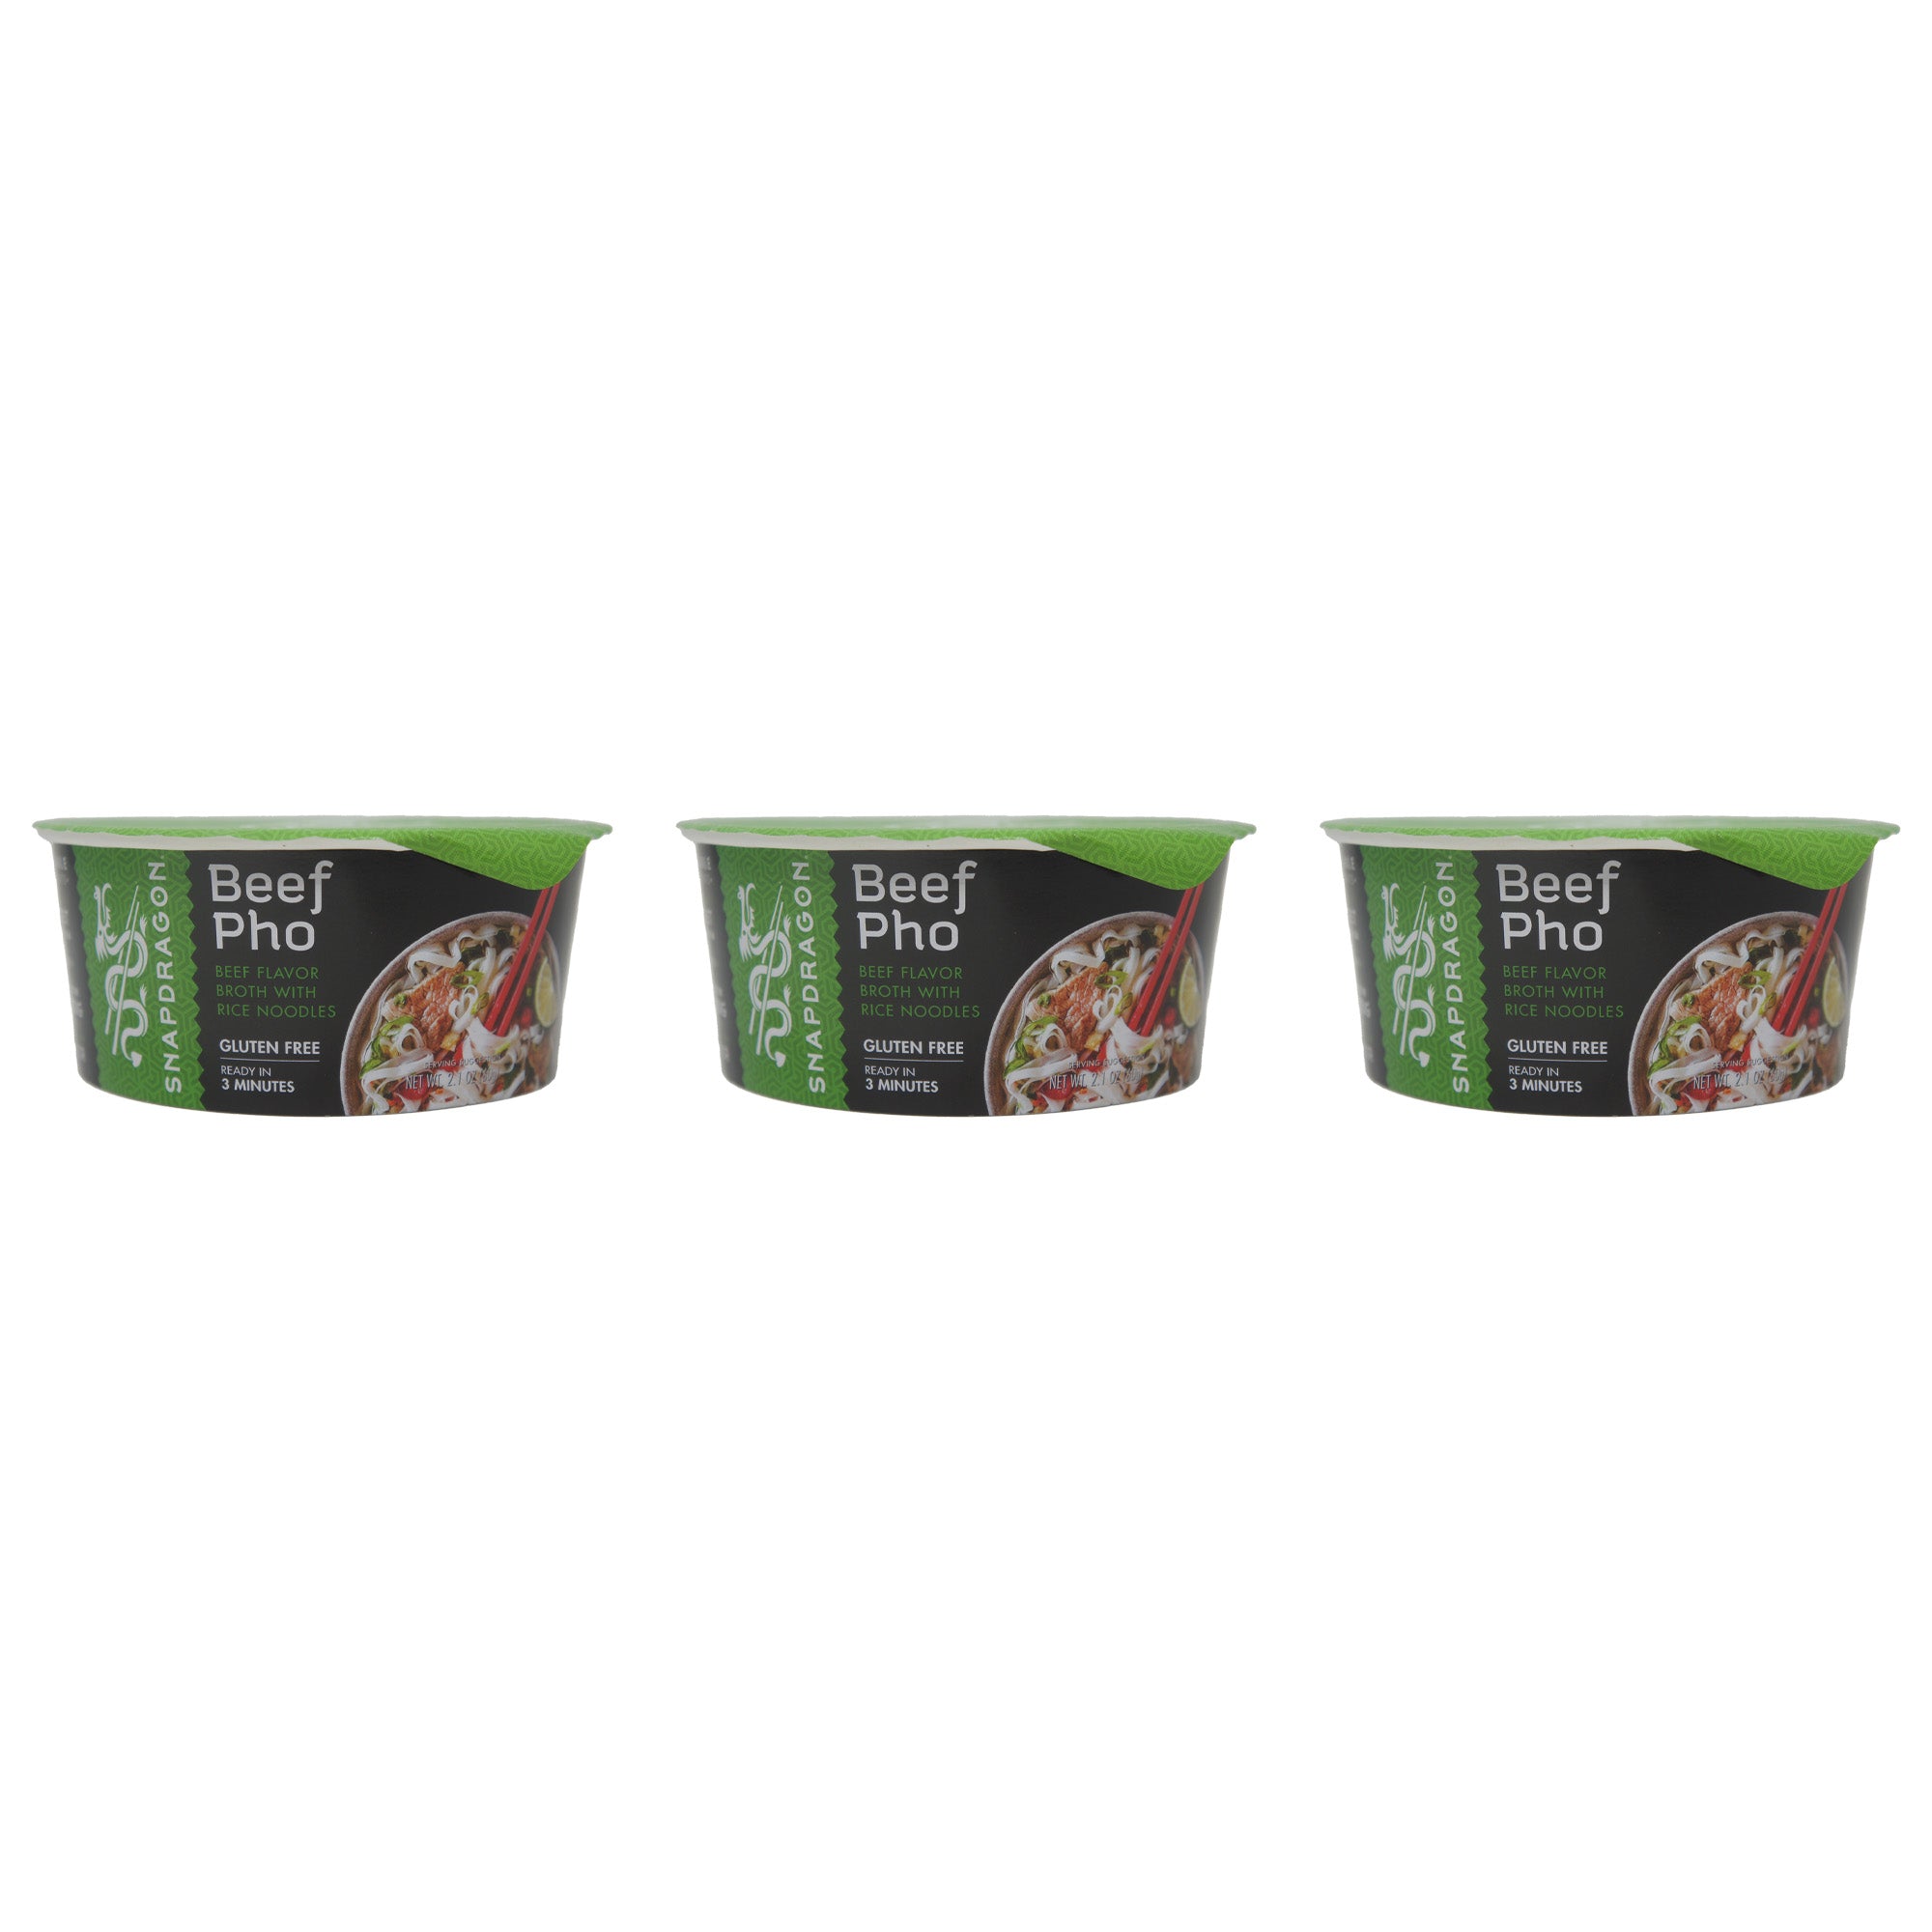 Snapdragon, Beef Pho Bowl, Beef Flavored Broth with Rice Noodles, 2.1 oz Pack